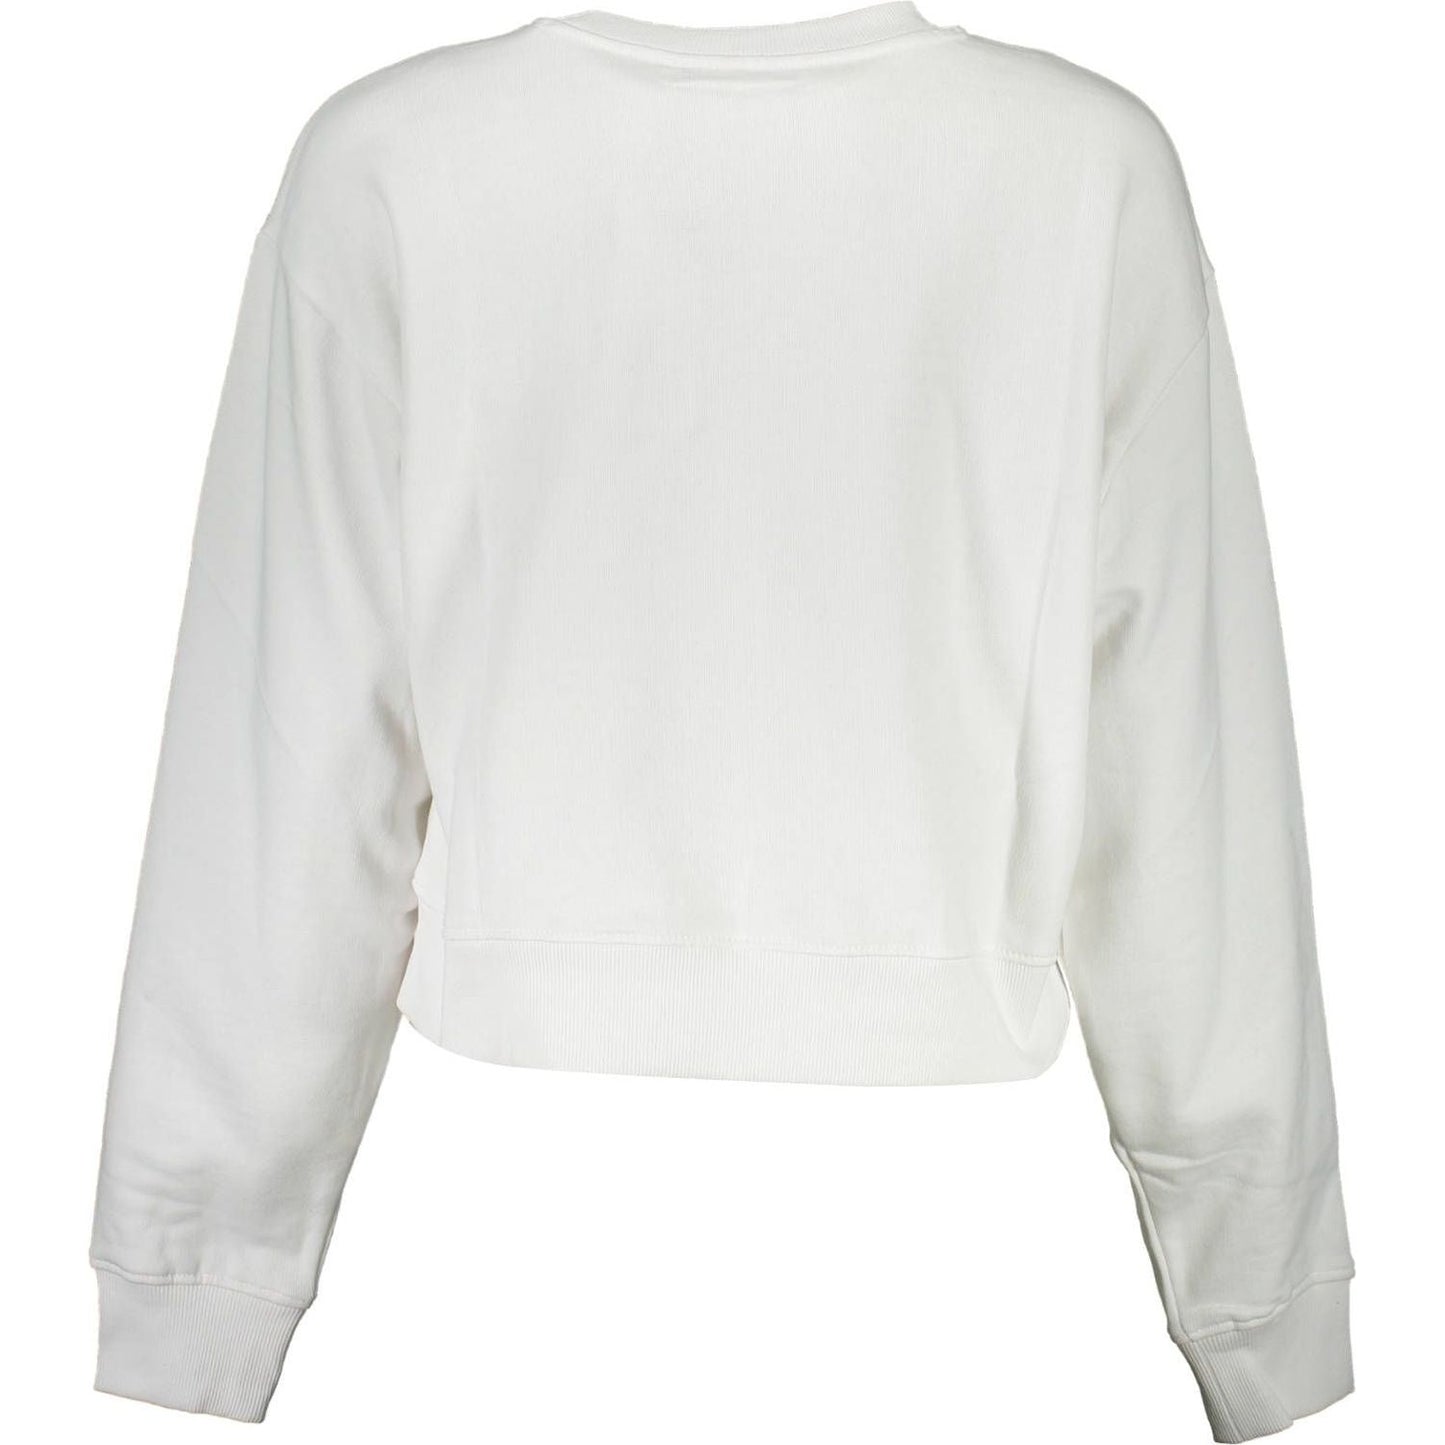 Guess Jeans Chic White Cotton Sweatshirt with Logo Print chic-white-cotton-sweatshirt-with-logo-print